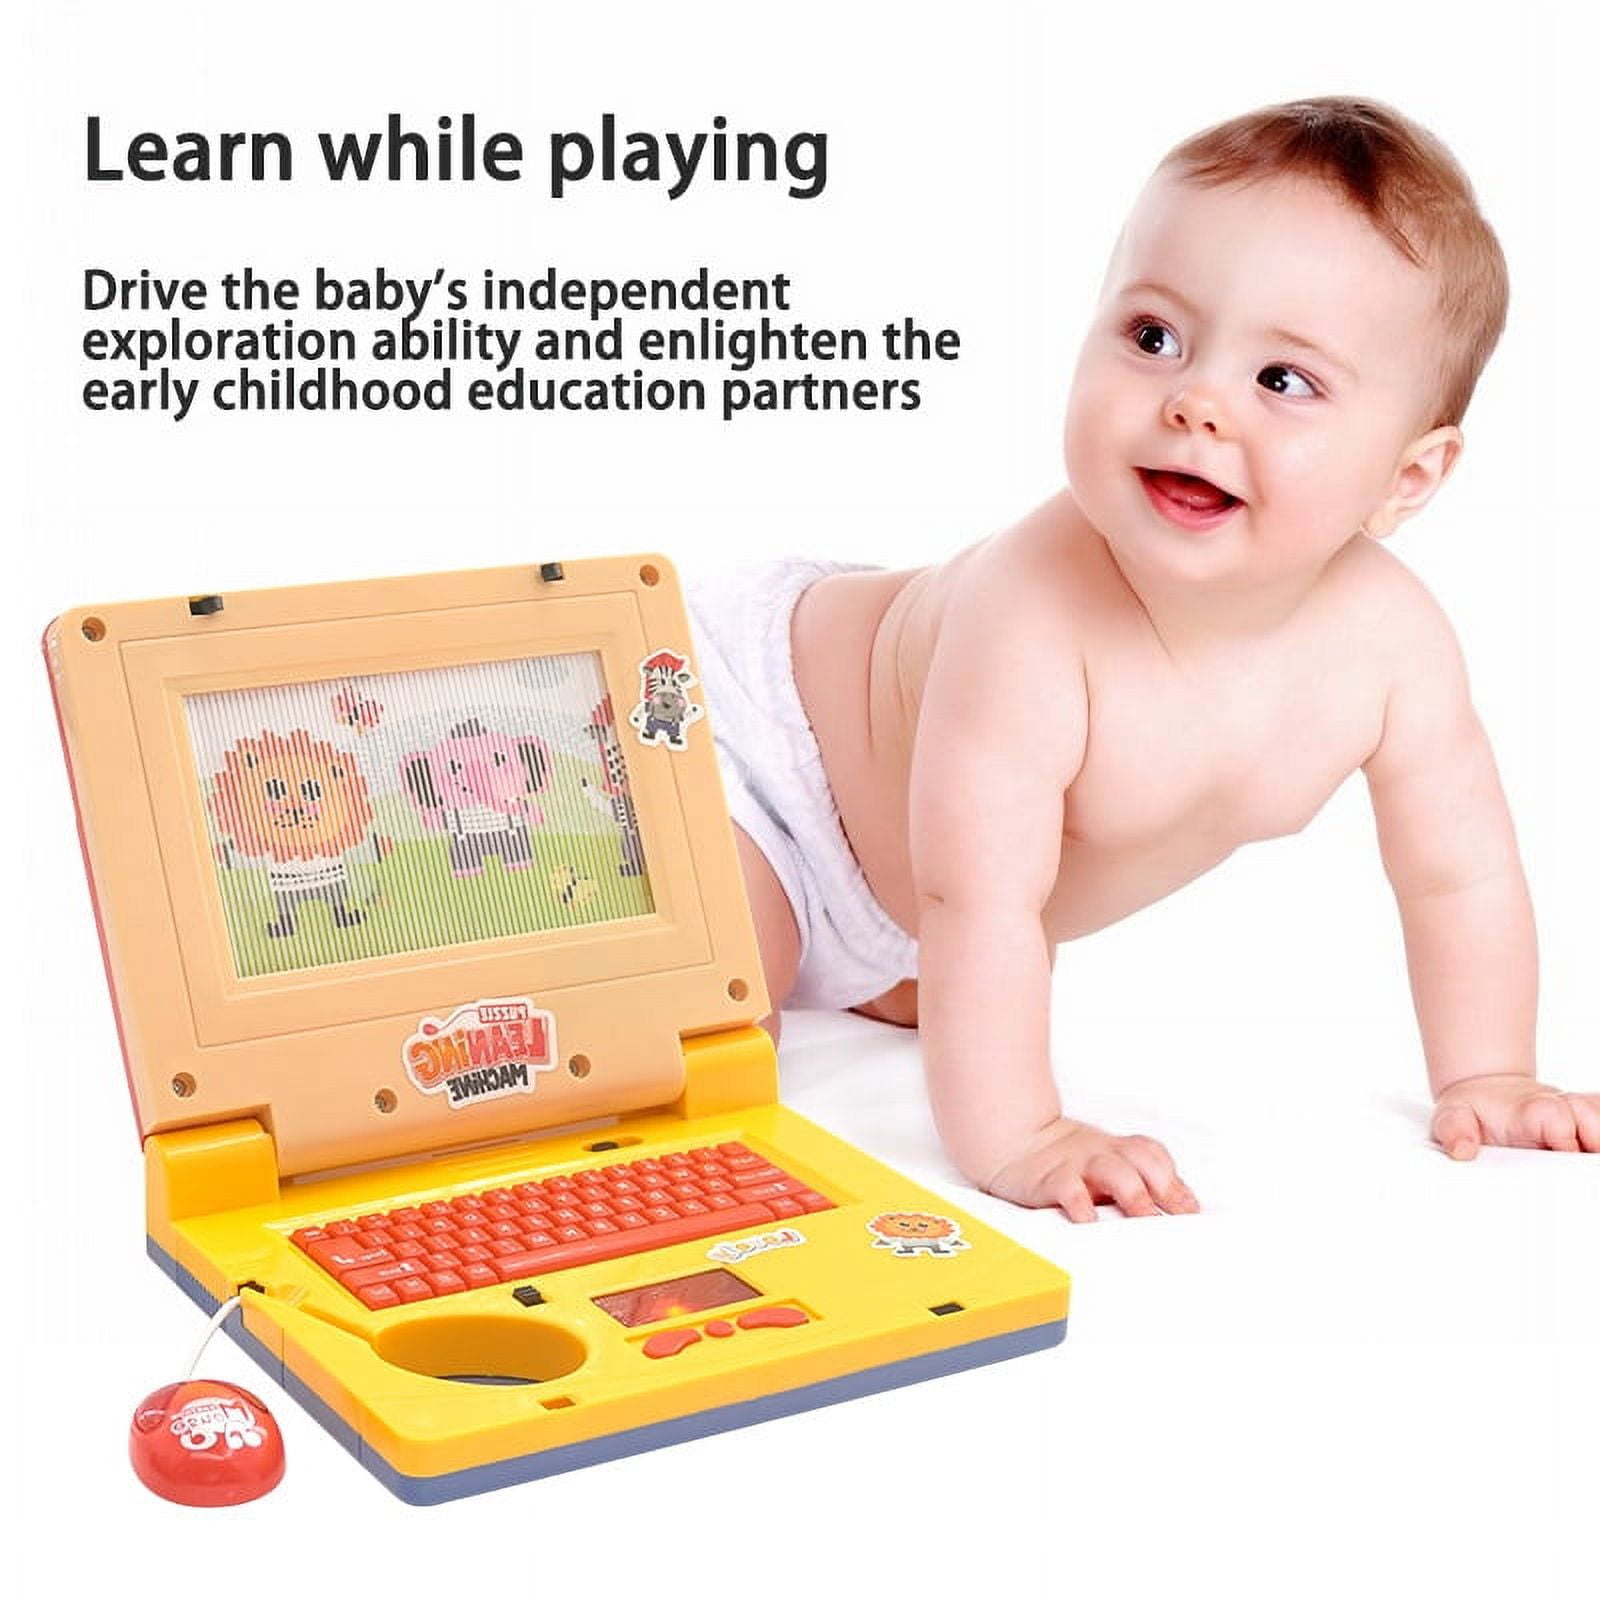 9 Babies' Computer Games to Encourage Learning